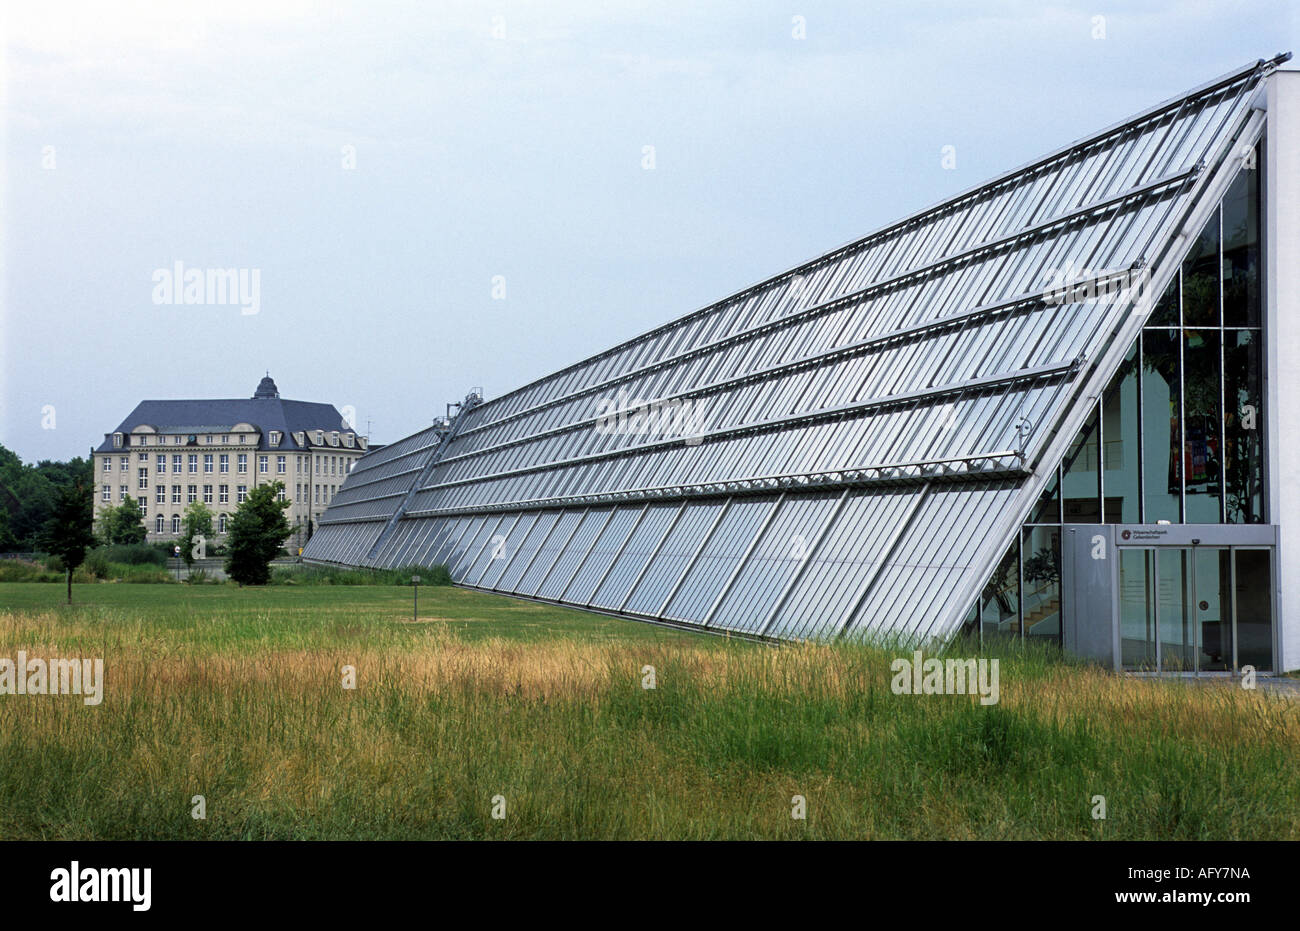 The Rhine-Elbe Science Park, a sustainable building with solar panels, Gelsenkirchen, North Rhine-Westphalia, Germany. Stock Photo